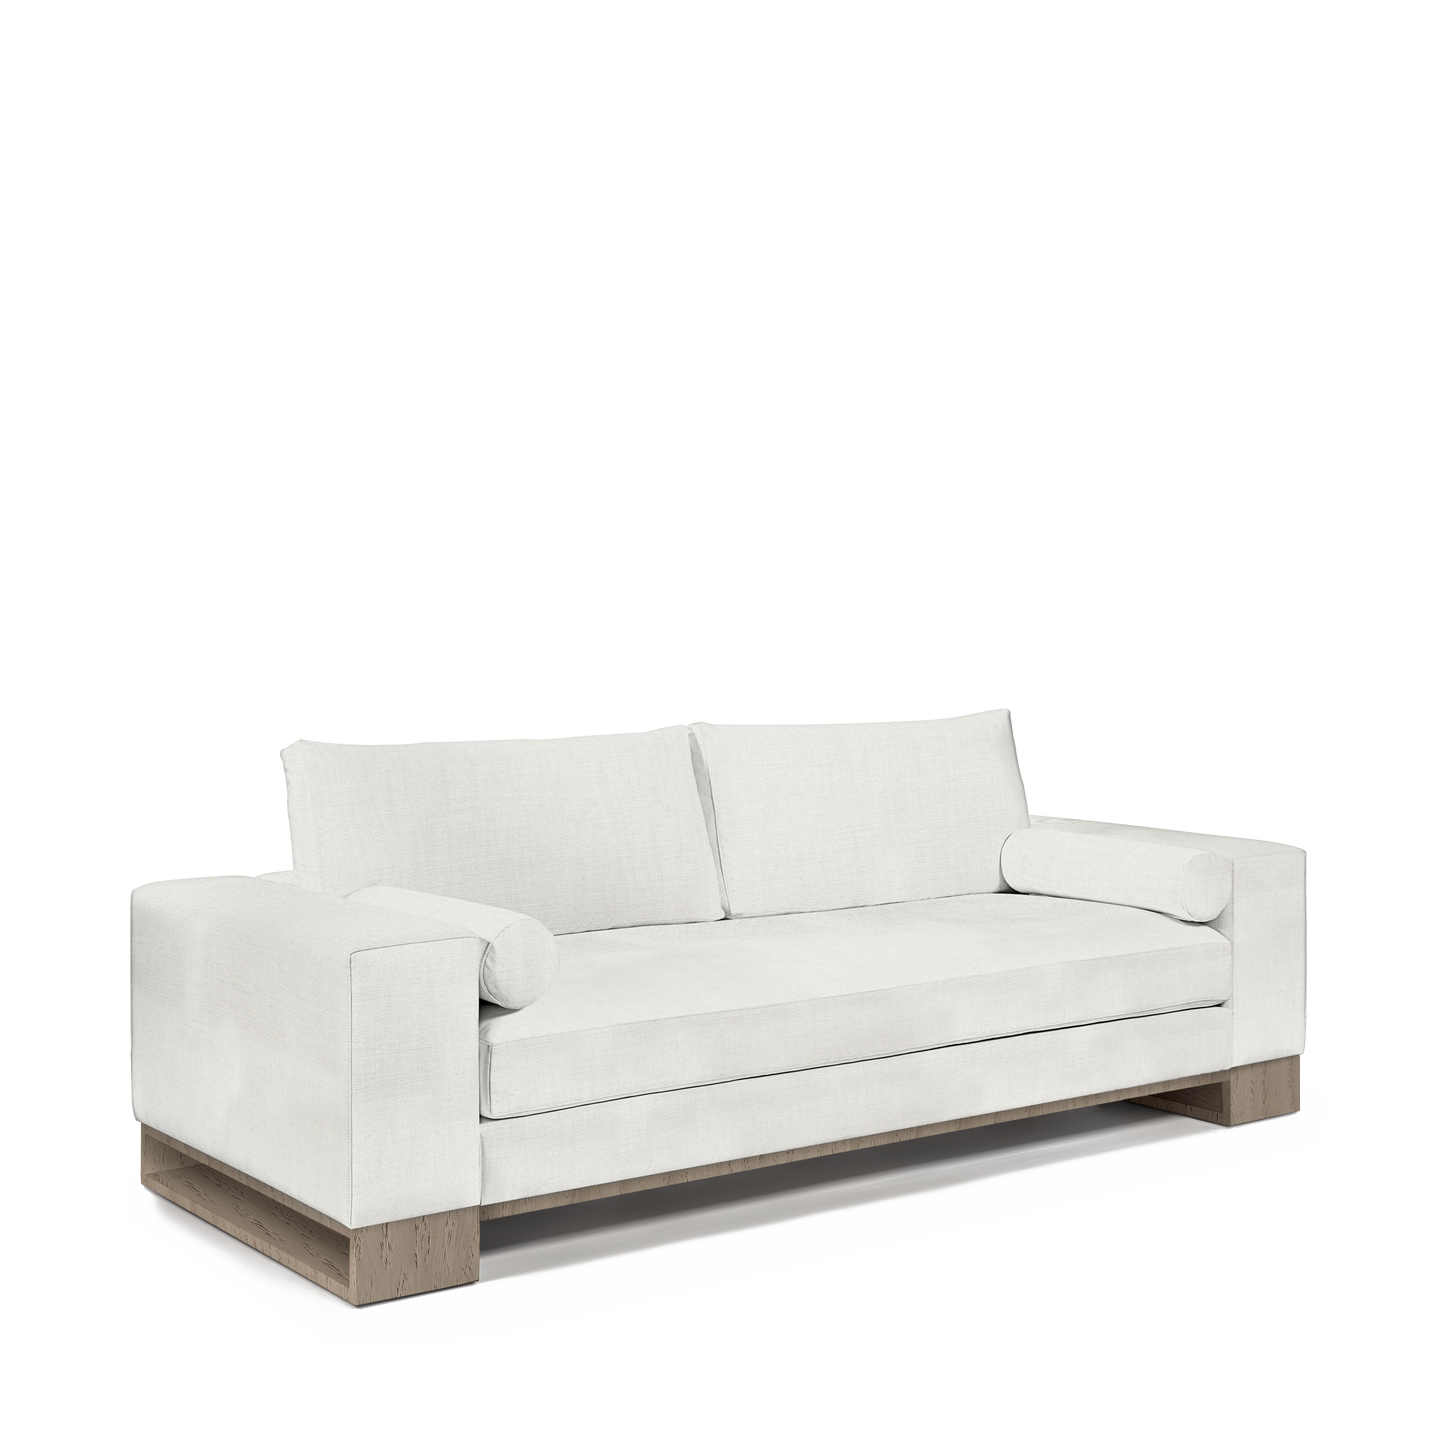 TERRA 2,5-seater sofa with rocco white textile and natural grey wood 